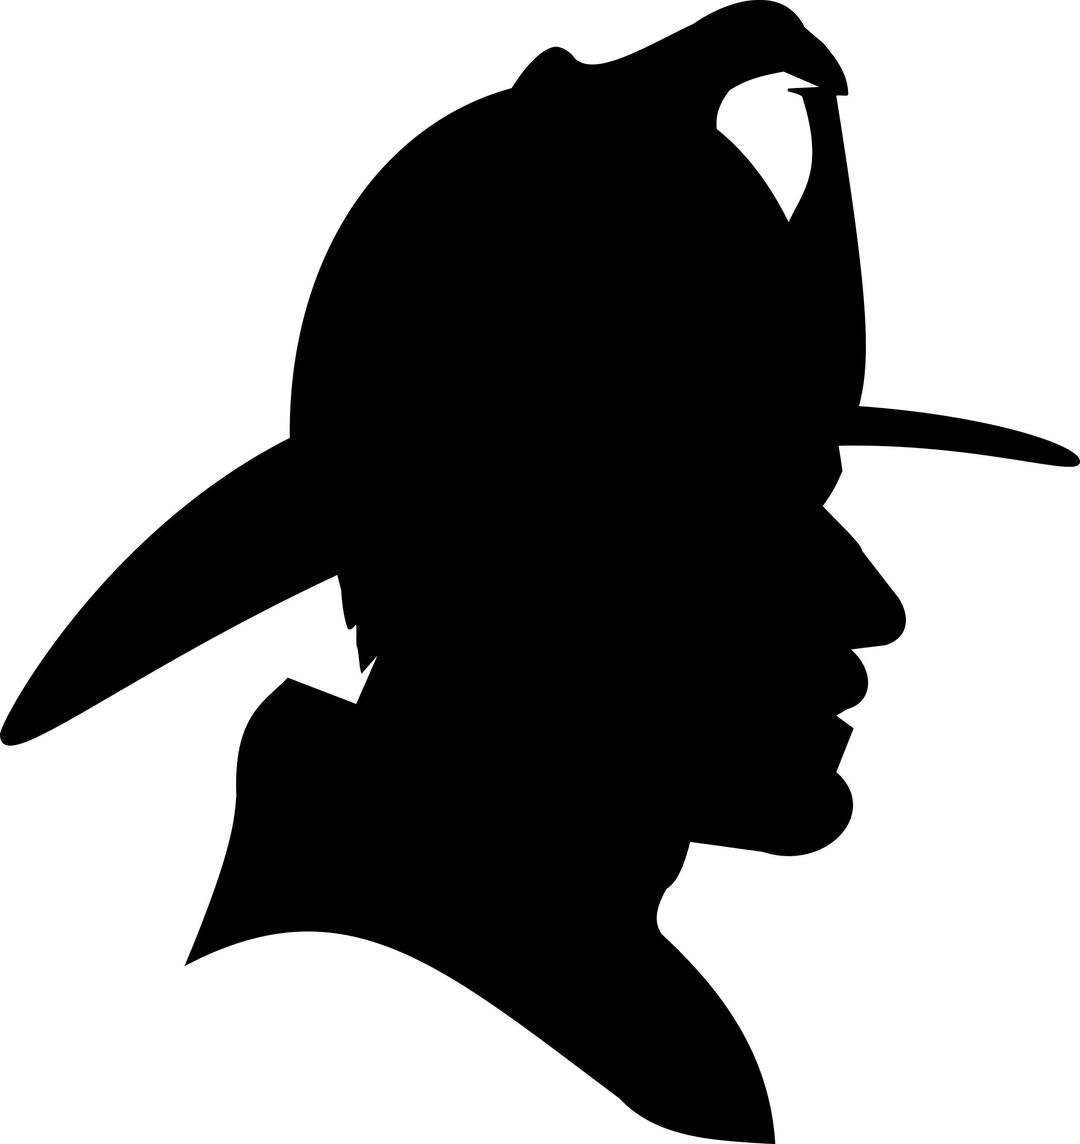 Firefighter Profile Silhouette png transparent